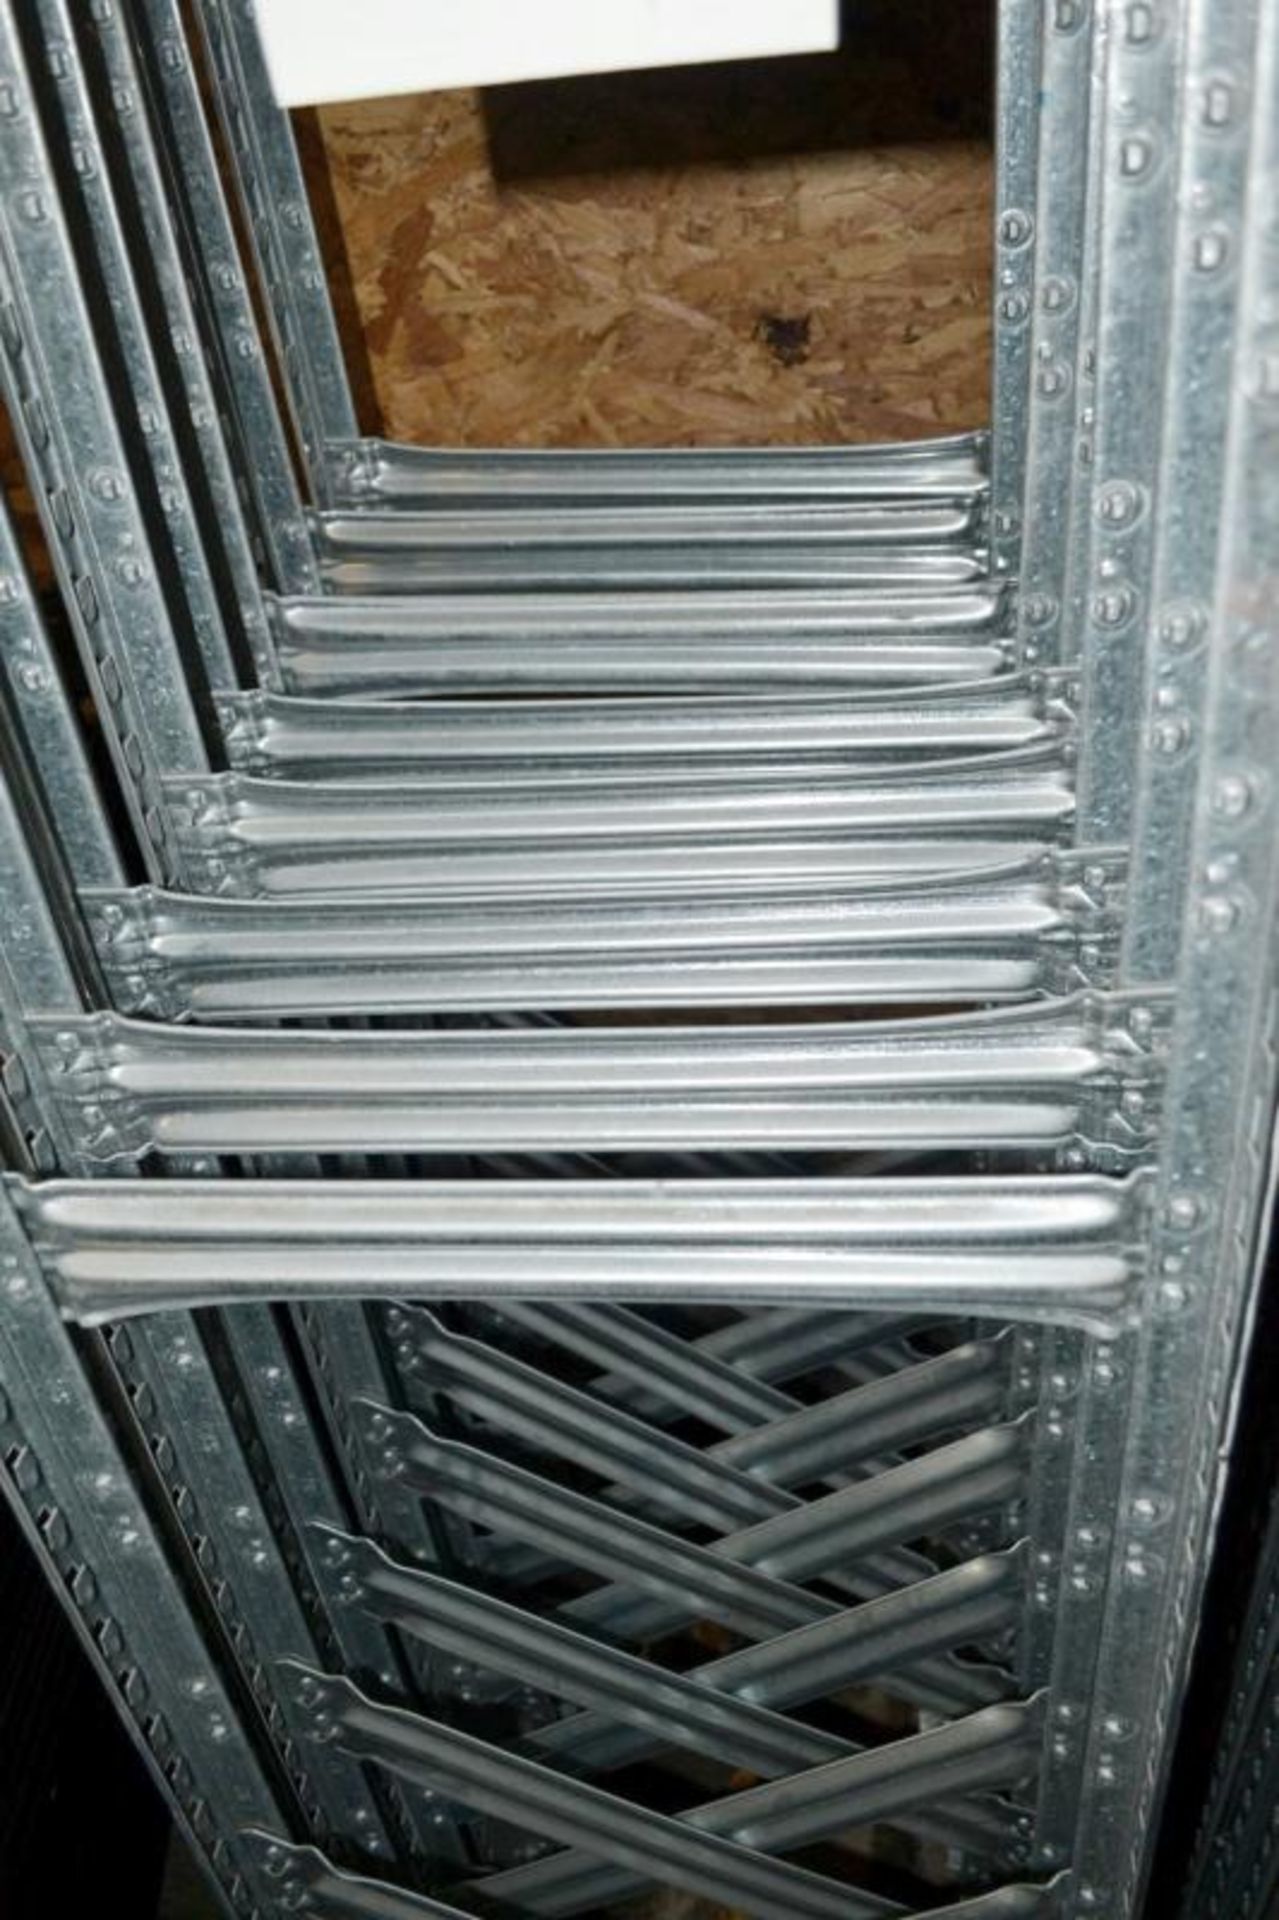 4 x Bays of Metalsistem Steel Modular Storage Shelving - Includes 29 Pieces - Recently Removed - Image 8 of 17